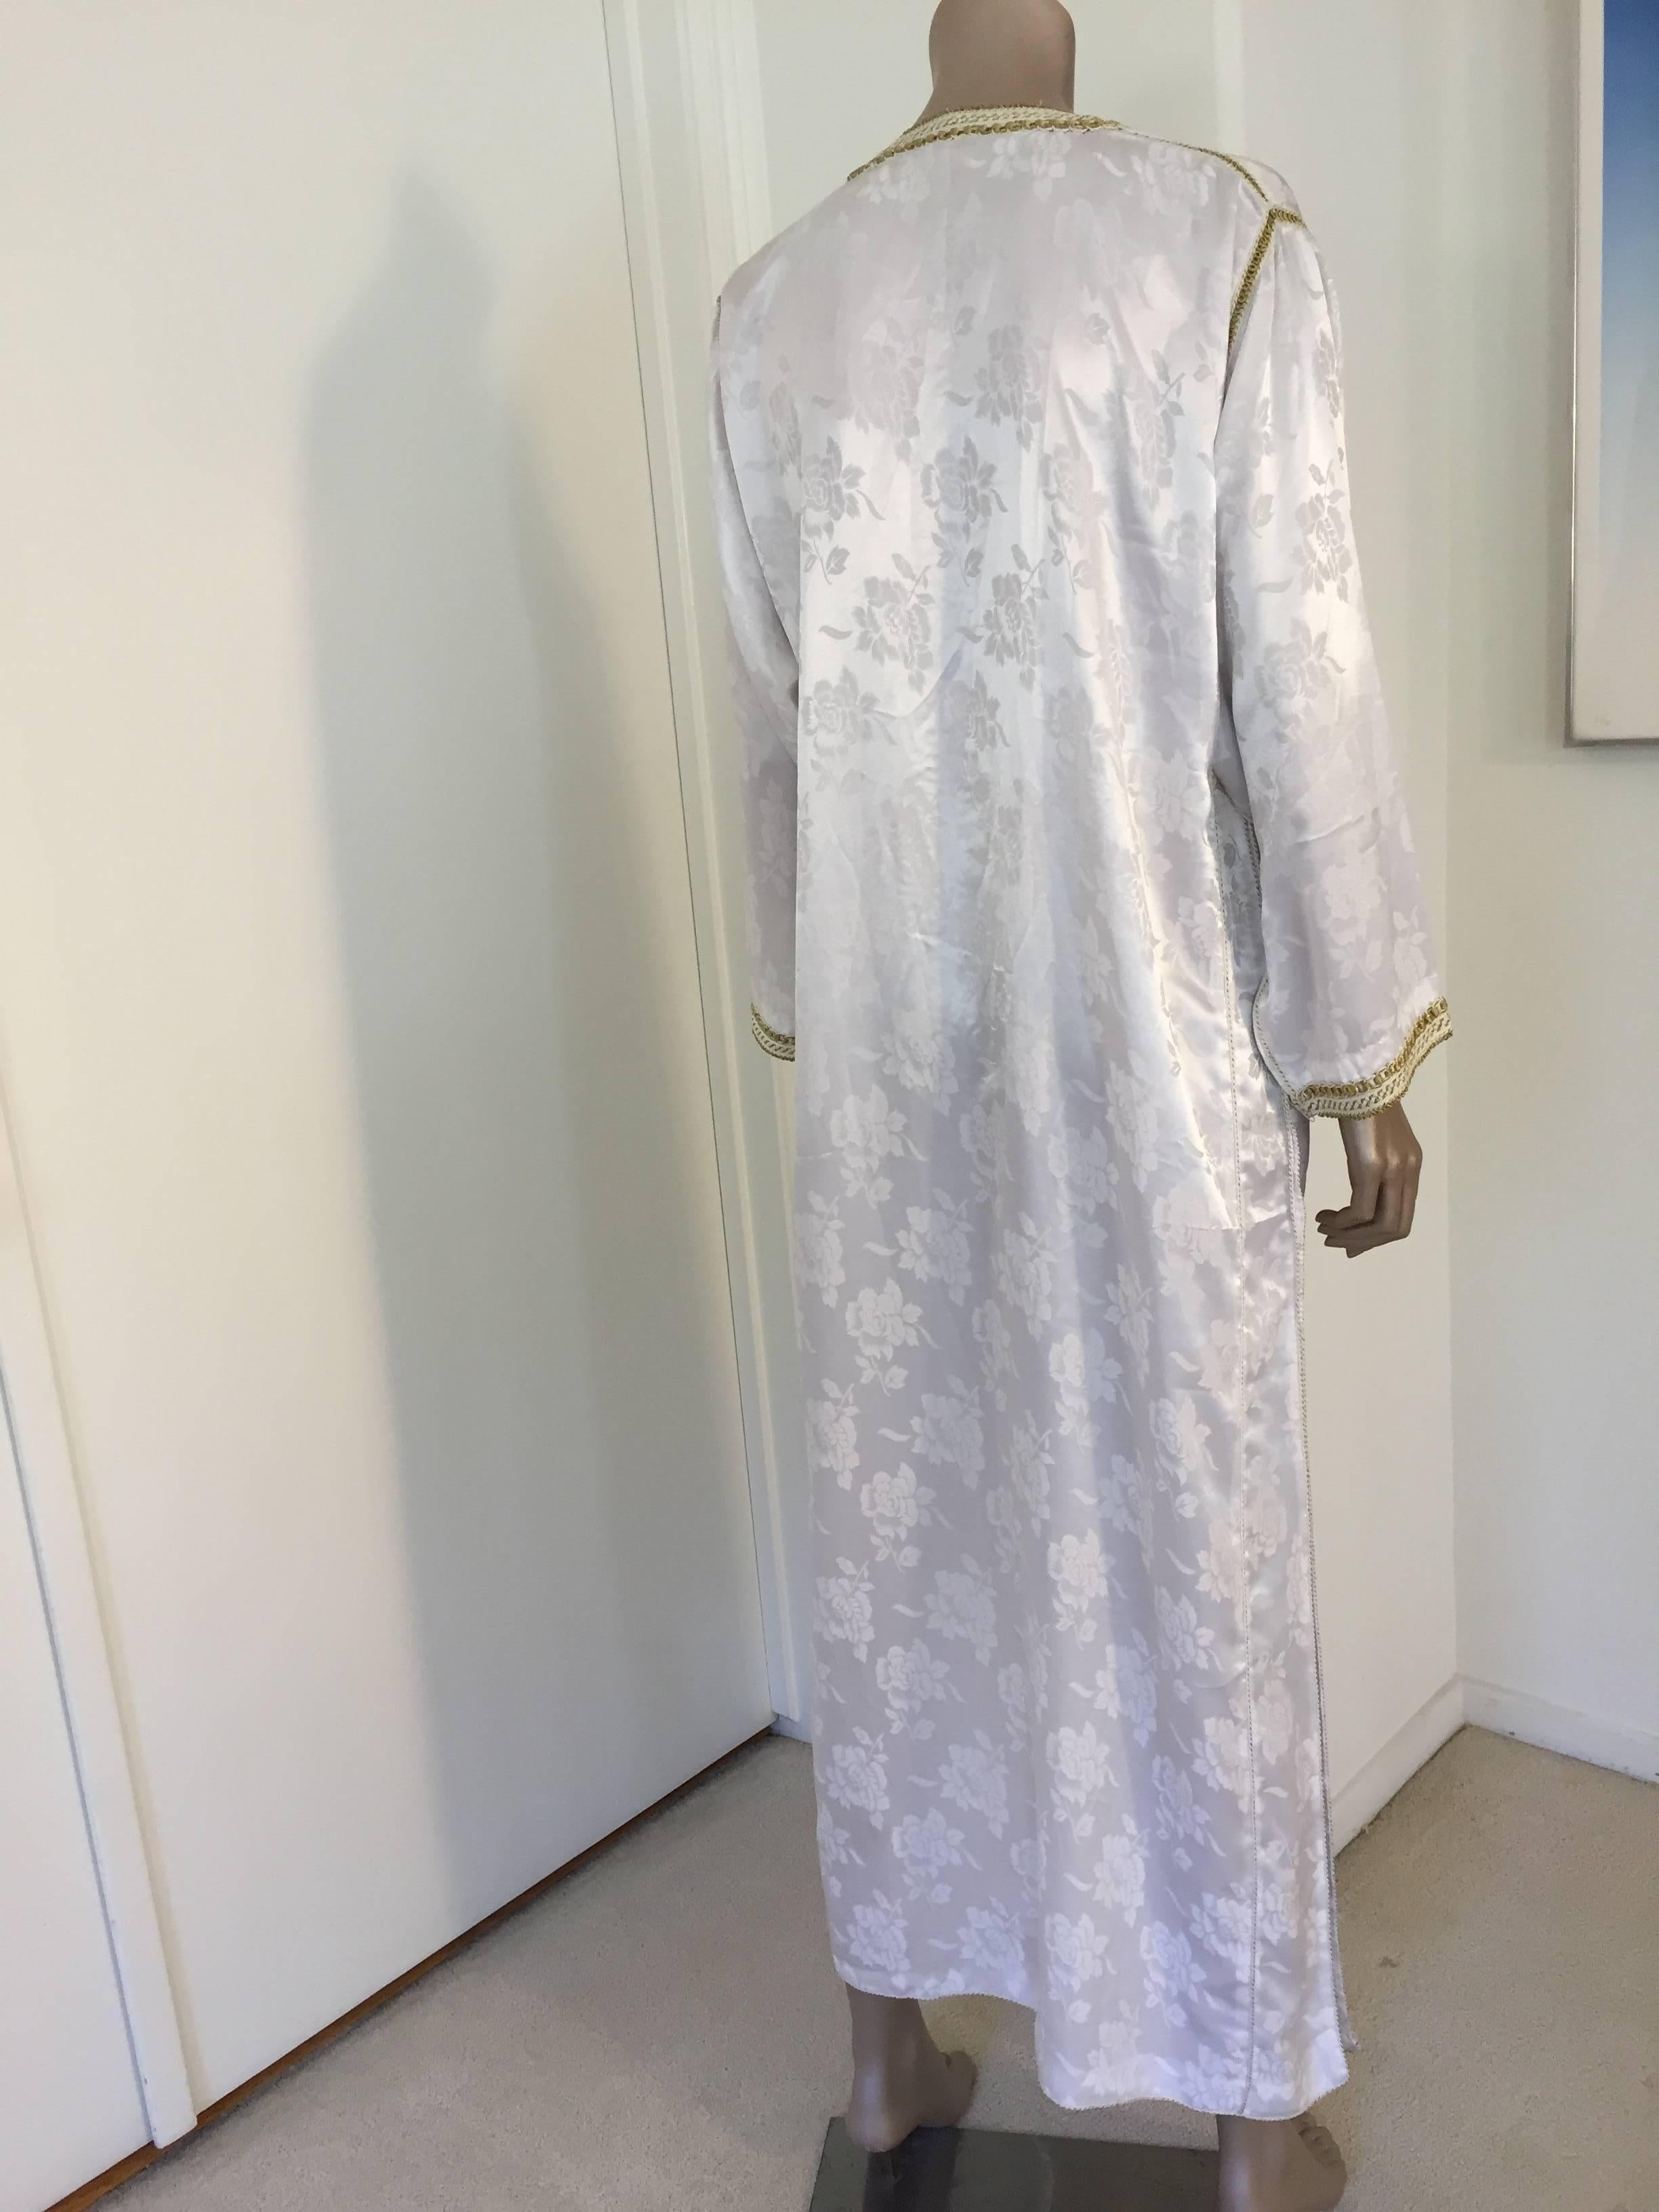 Moroccan Caftan Gown White Embroidered with Gold Trim, circa 1970 For Sale 3